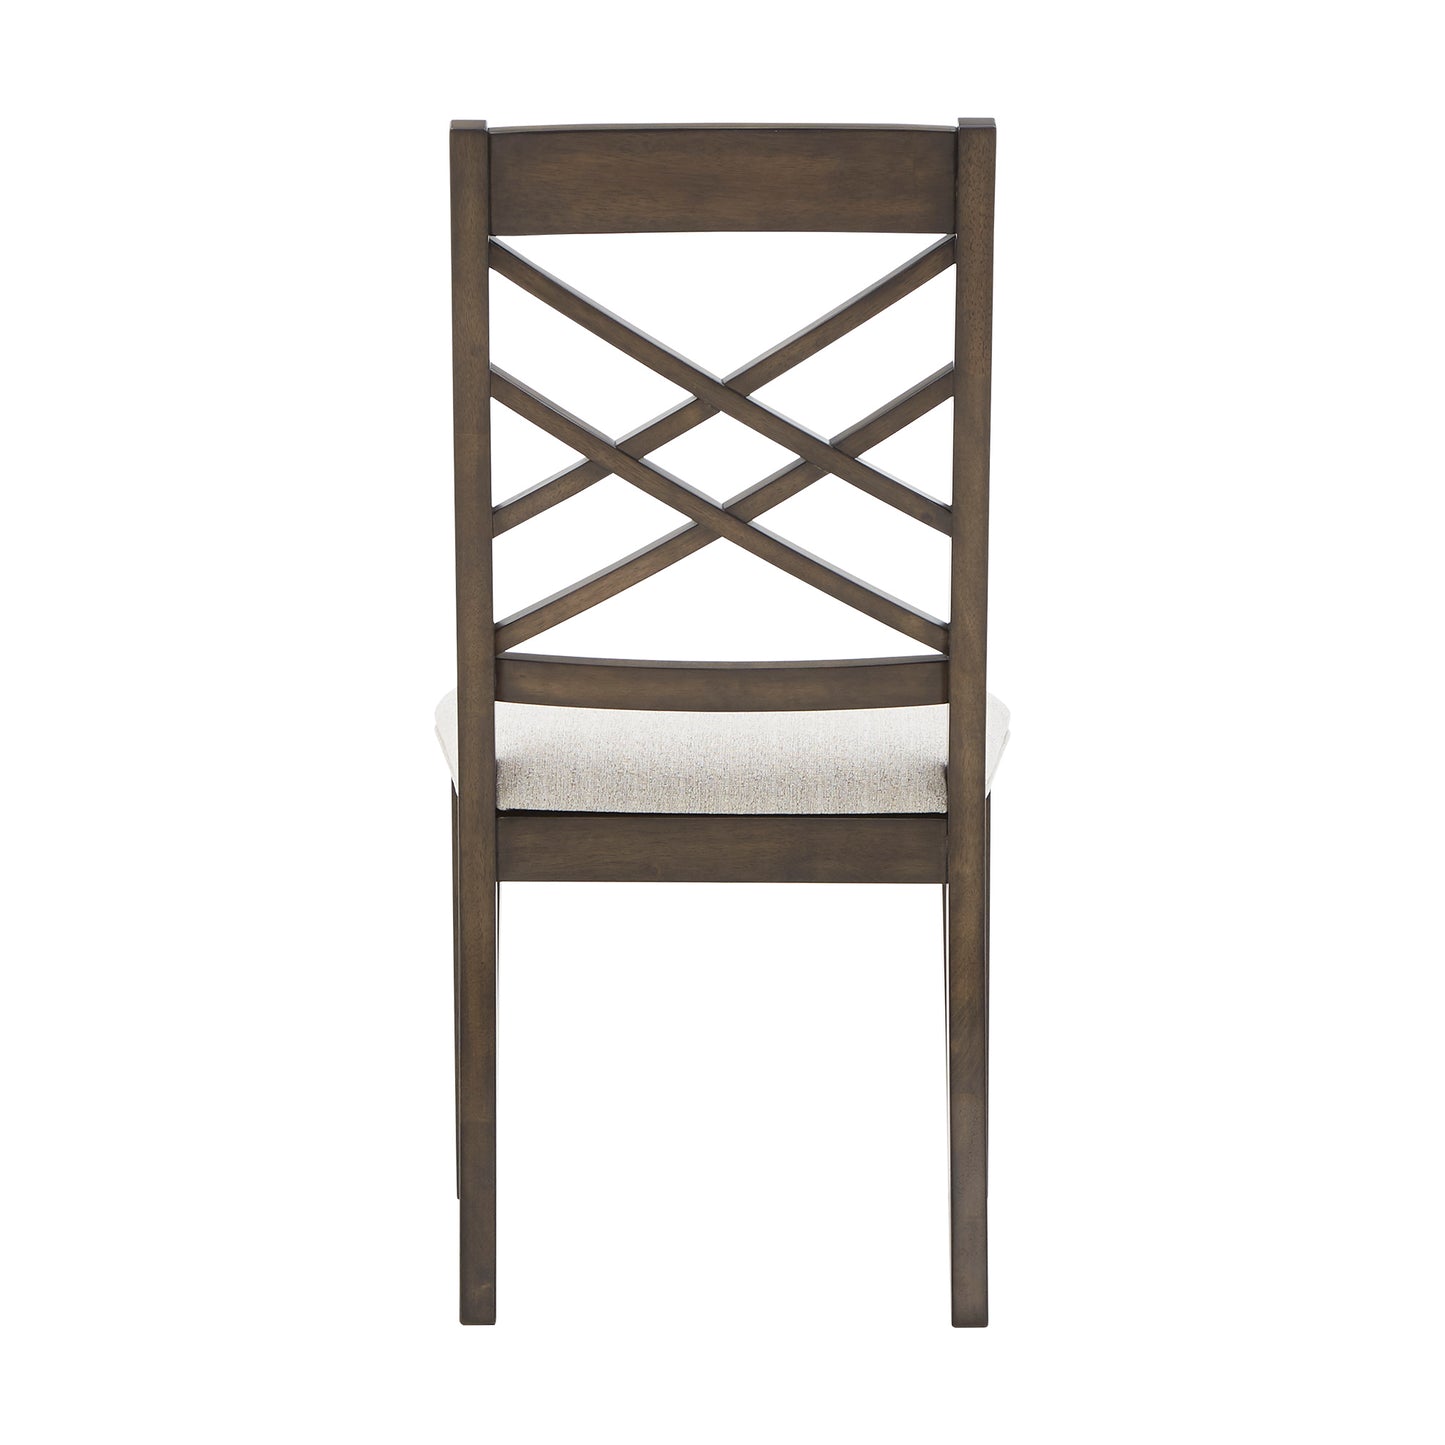 Espresso Finish Dining Chairs (Set of 2) - Light Brown Fabric